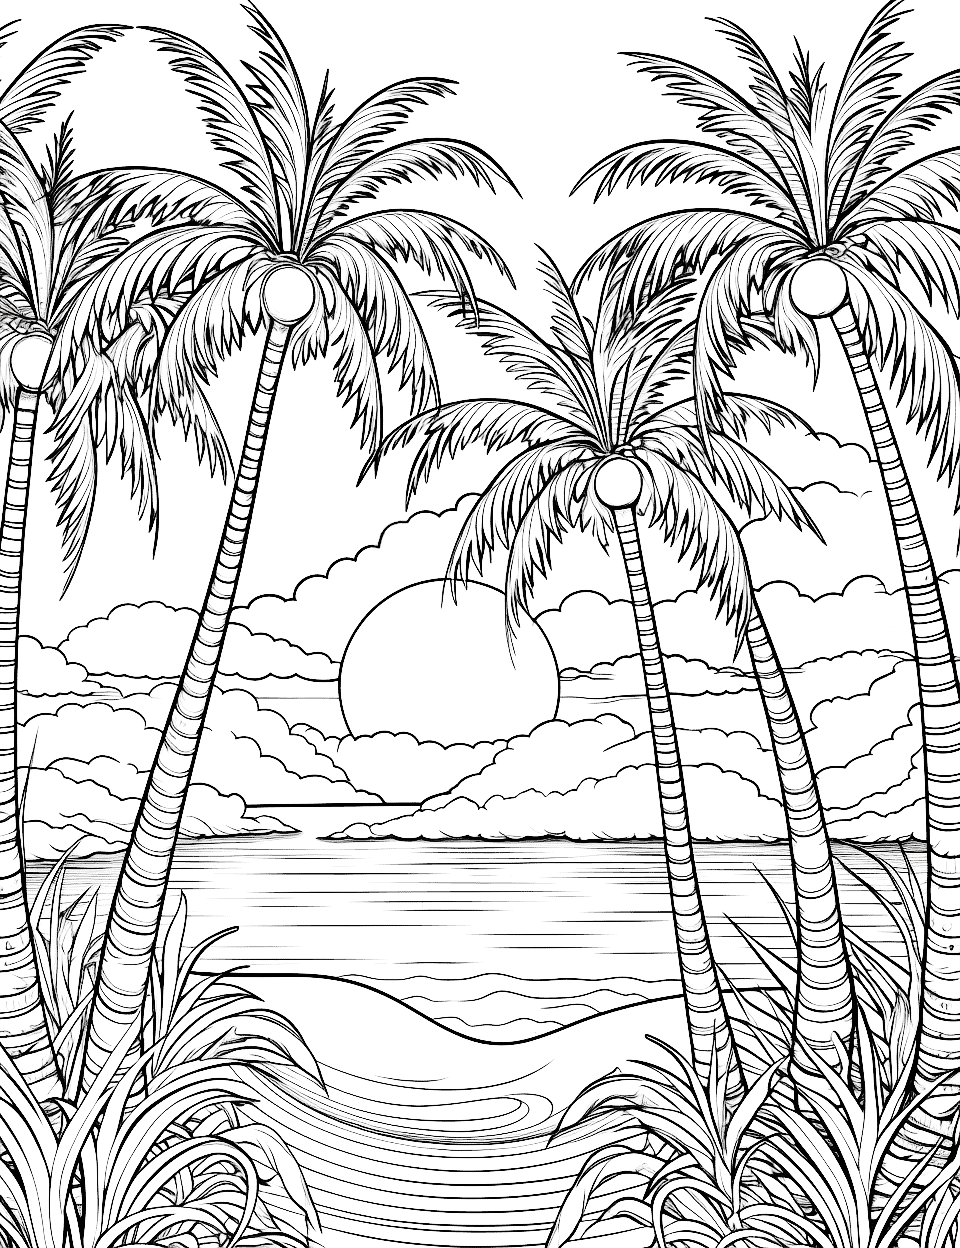 Tropical Paradise Adult Coloring Page - Palm trees with coconuts against a setting sun.